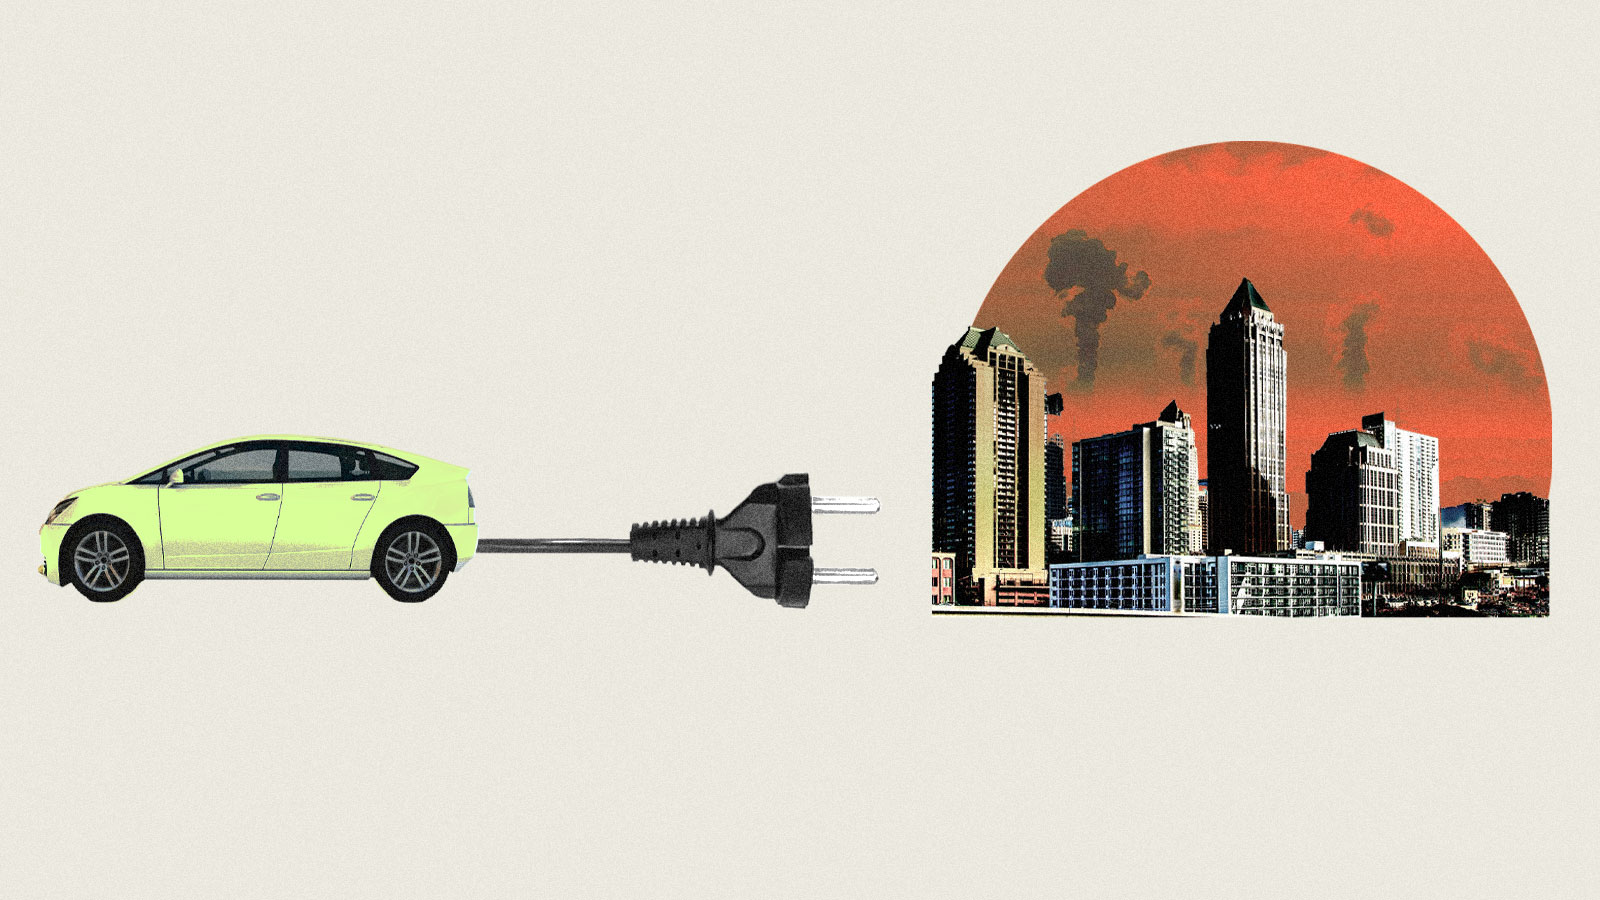 Photo collage of a car with an electrical plug coming out of it next to a smoggy city